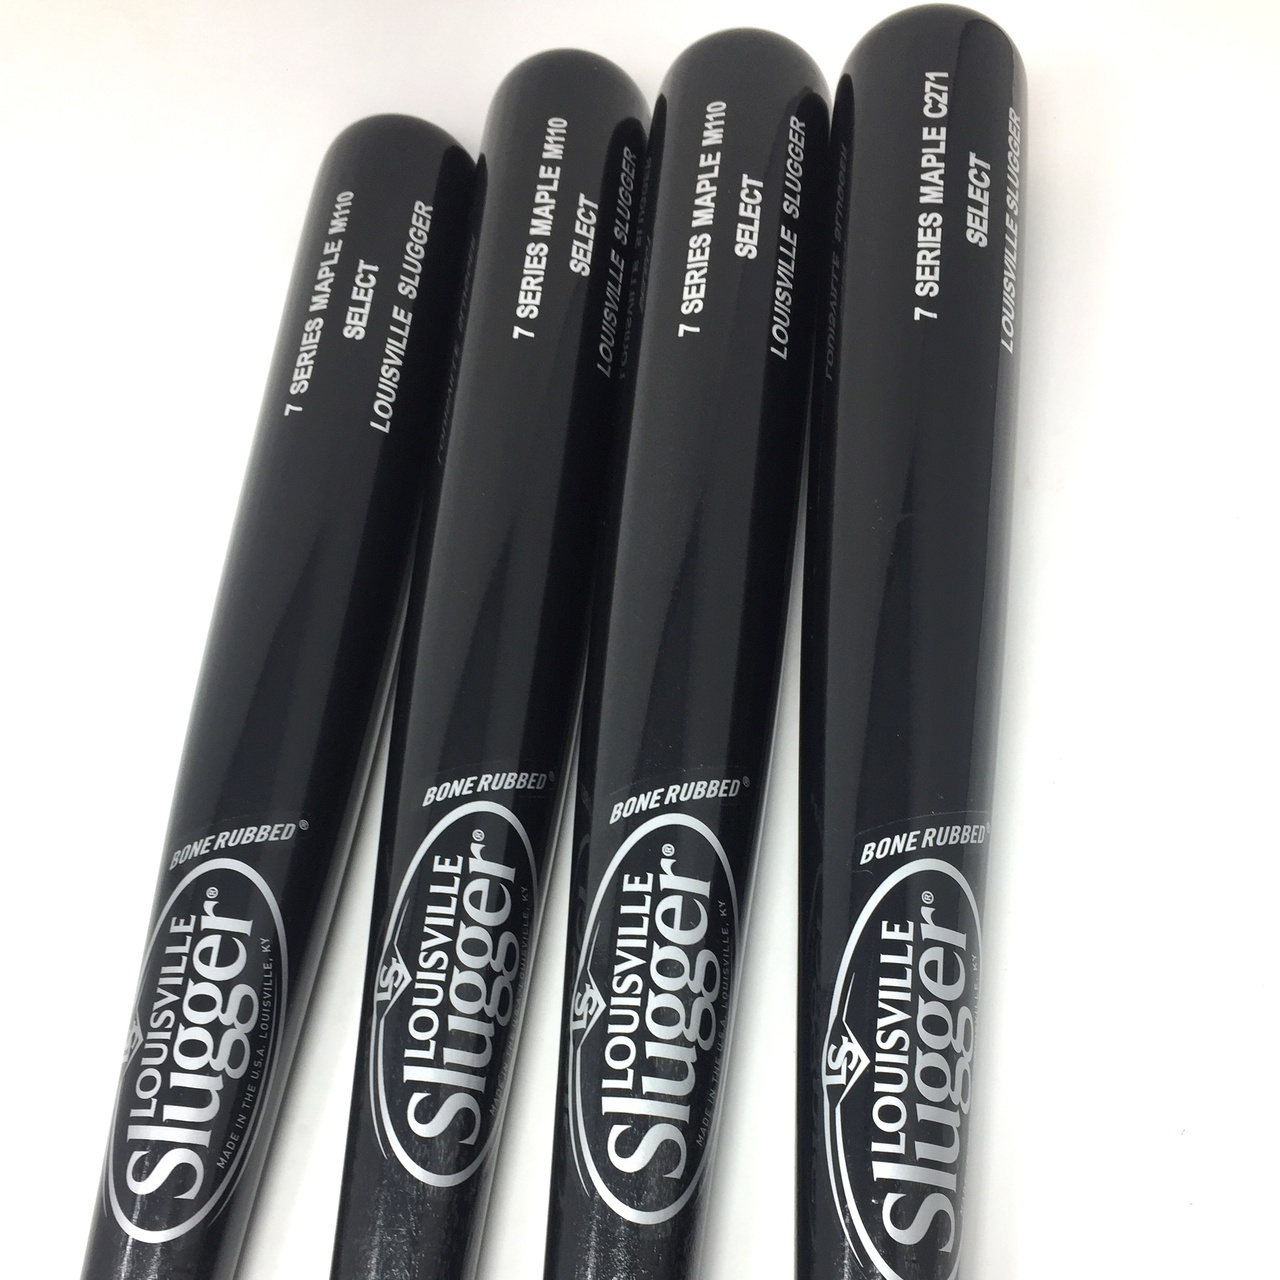 34 Inch Series 7 Maple Wood Baseball Bats from Louisville Slugger. High Gloss Finish, Cupped, and no ink dot. 3 M110 and 1 C271. 4 bats in total.